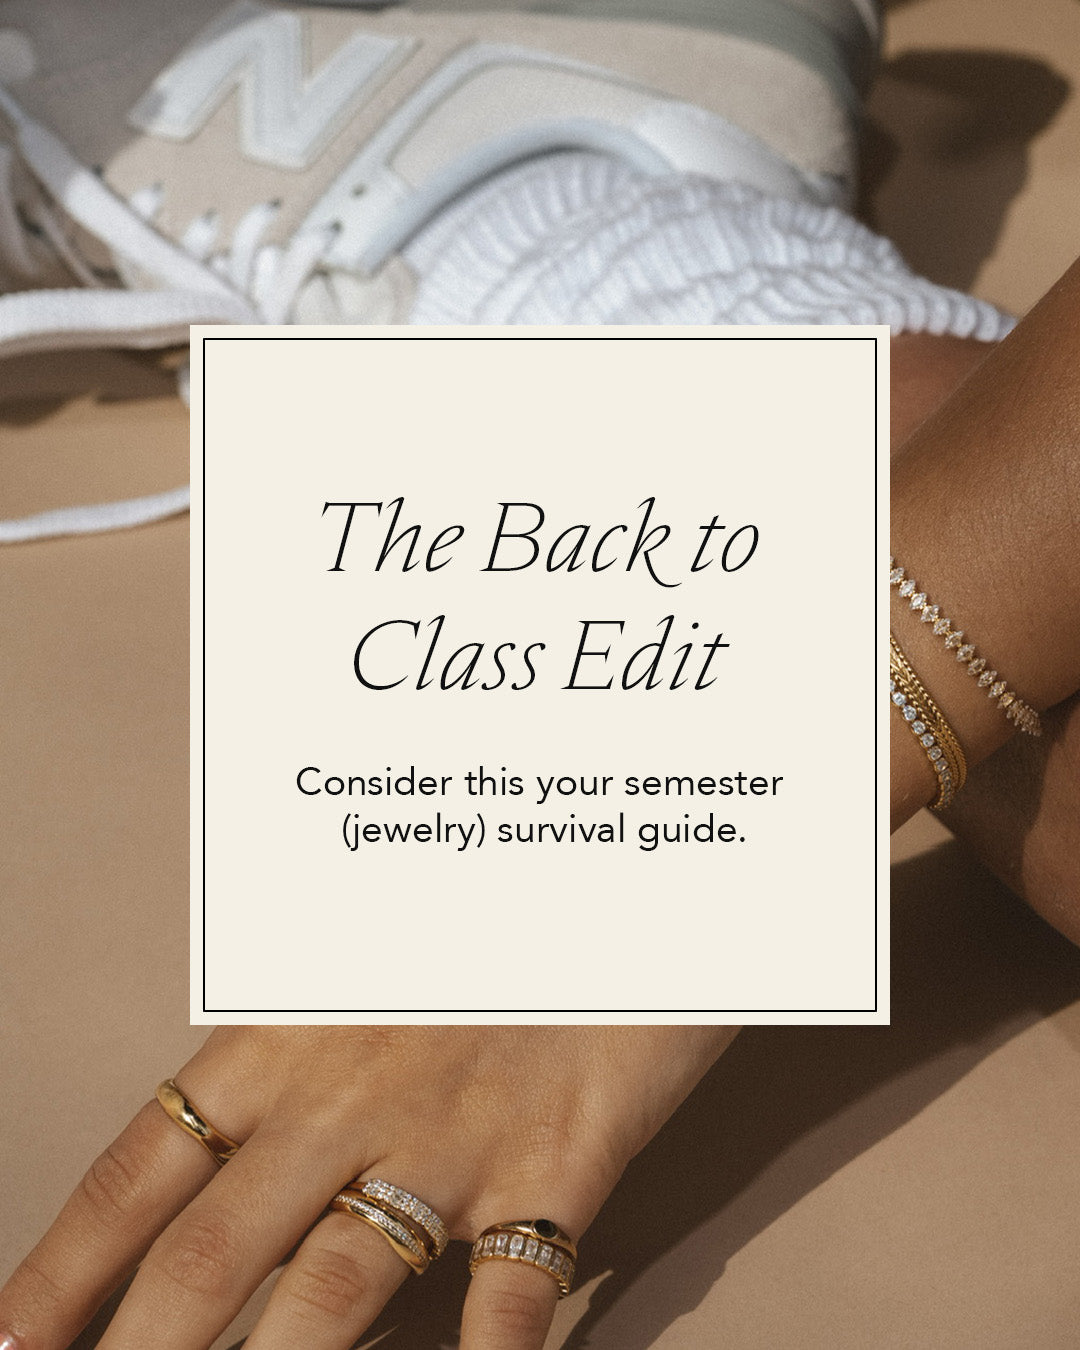 The Back to Class Edit